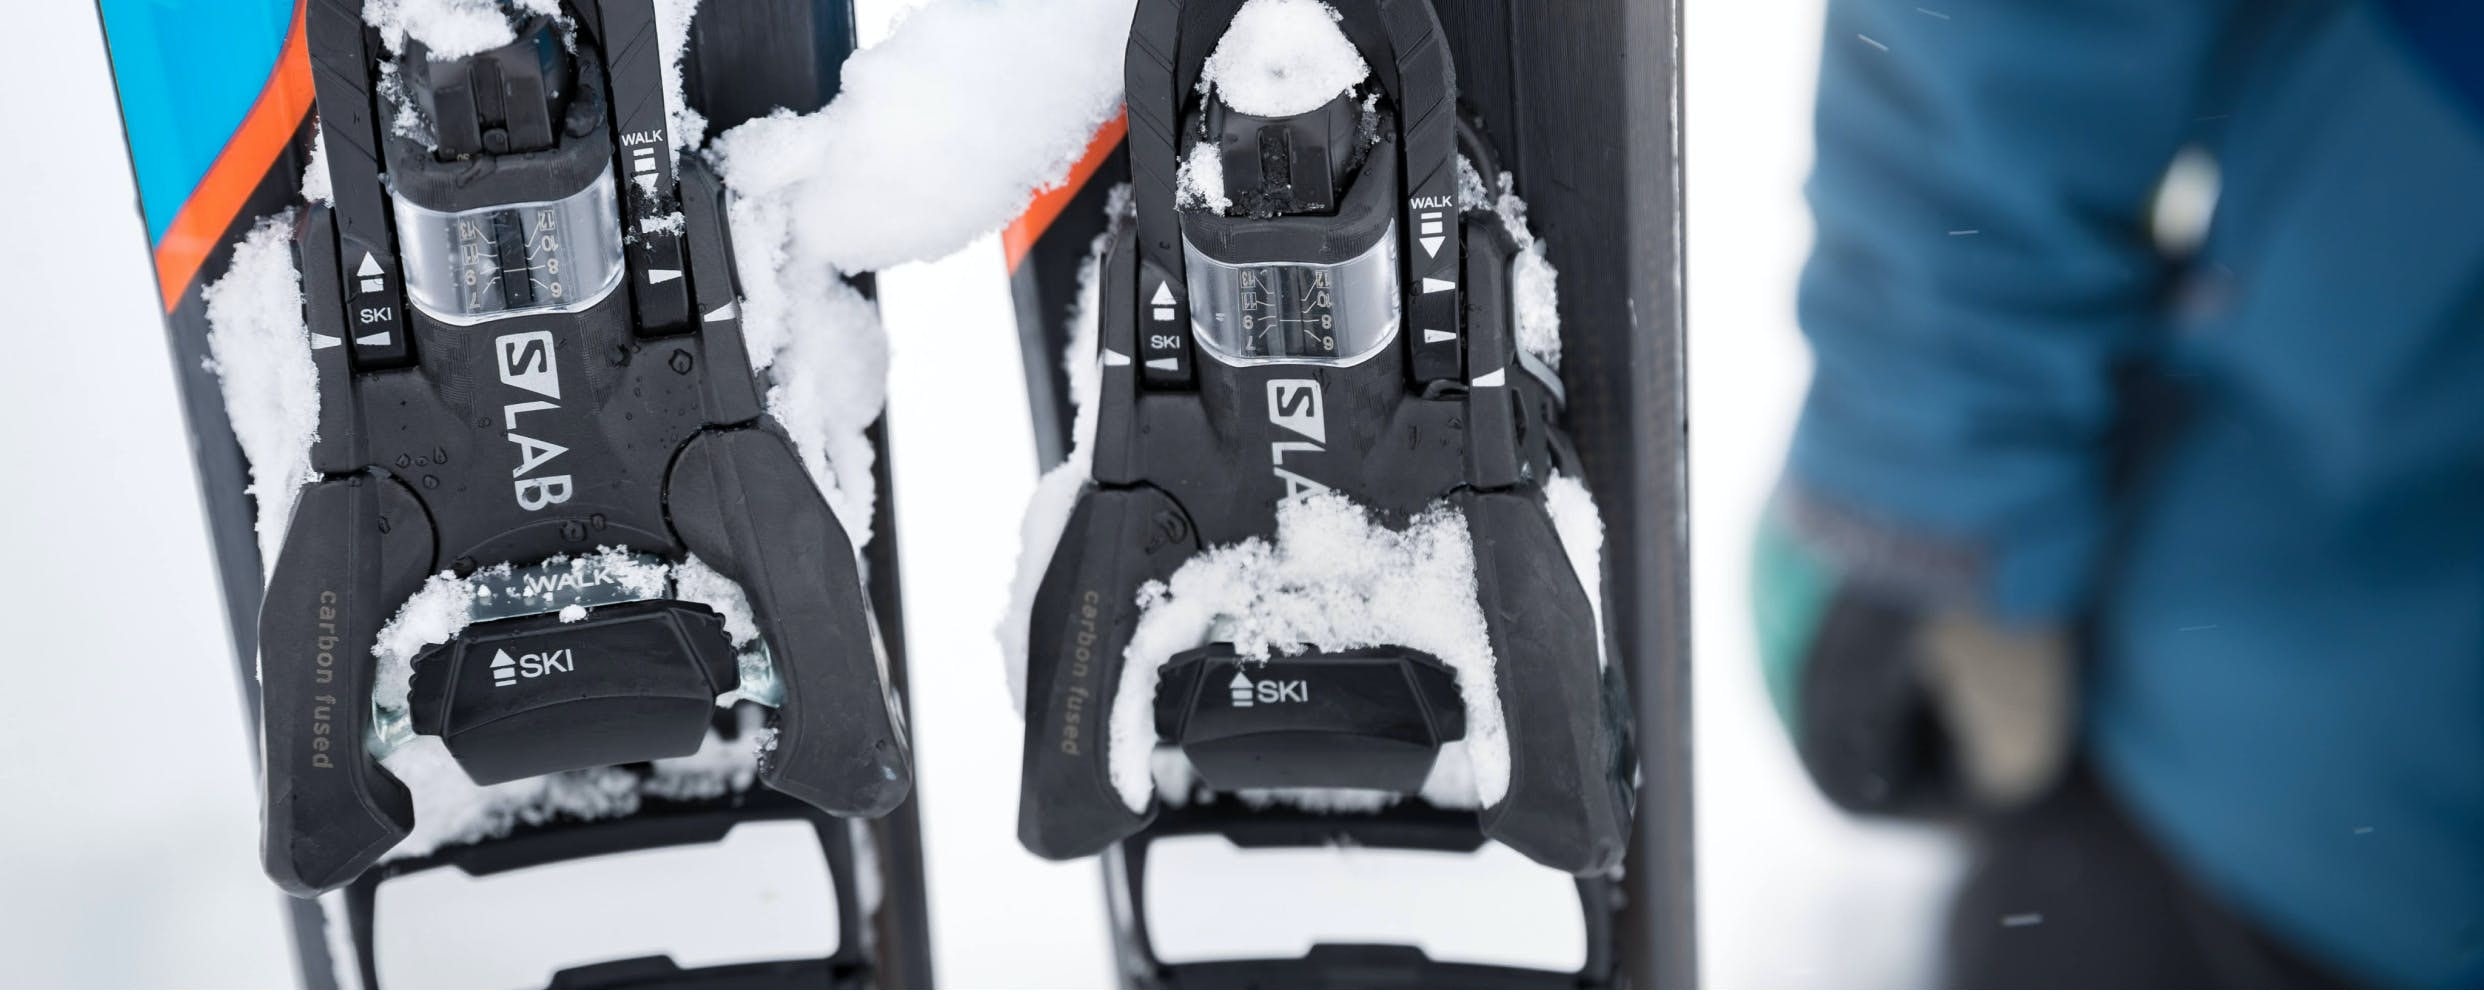 Find the right bindings for backcountry ski touring or downhill skiing.